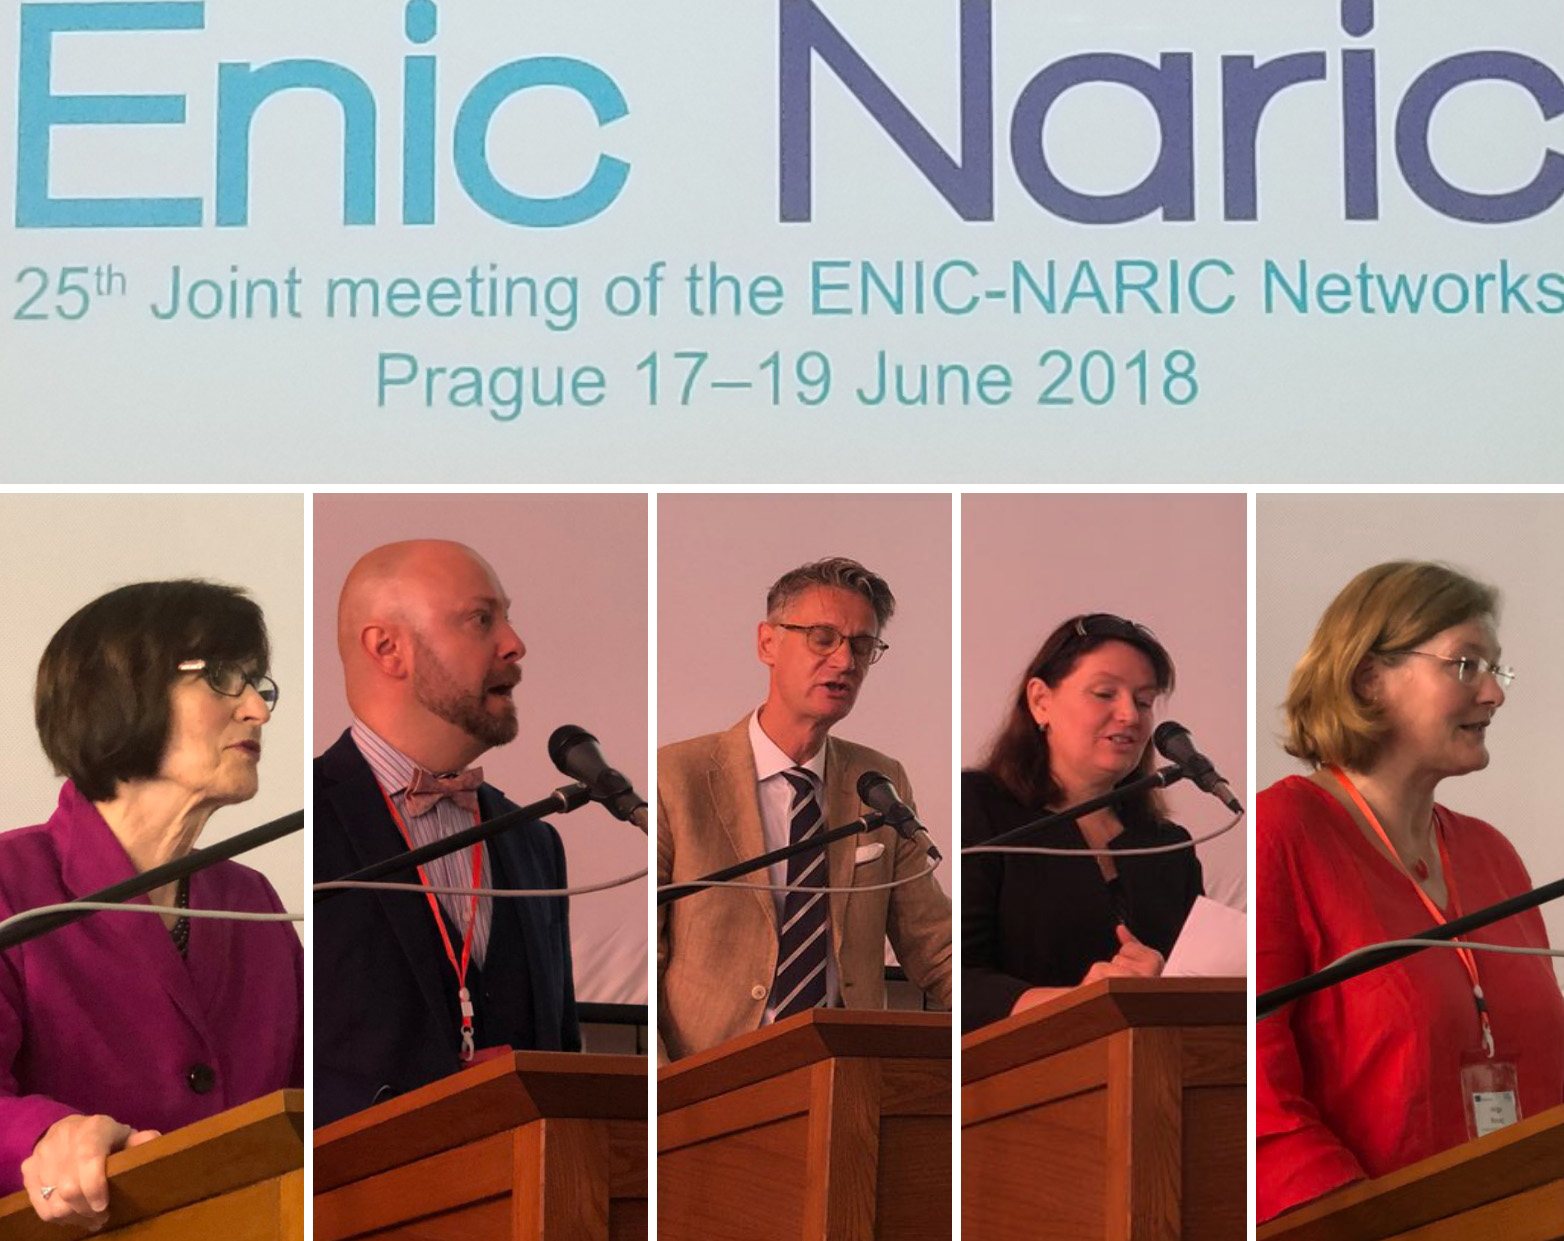 Five photos of speakers evenly framed at the bottom of the image with the following text written above the photos: 25th Joint meeting of the Enic-Naric Networks, Prague 17-19 June 2018.